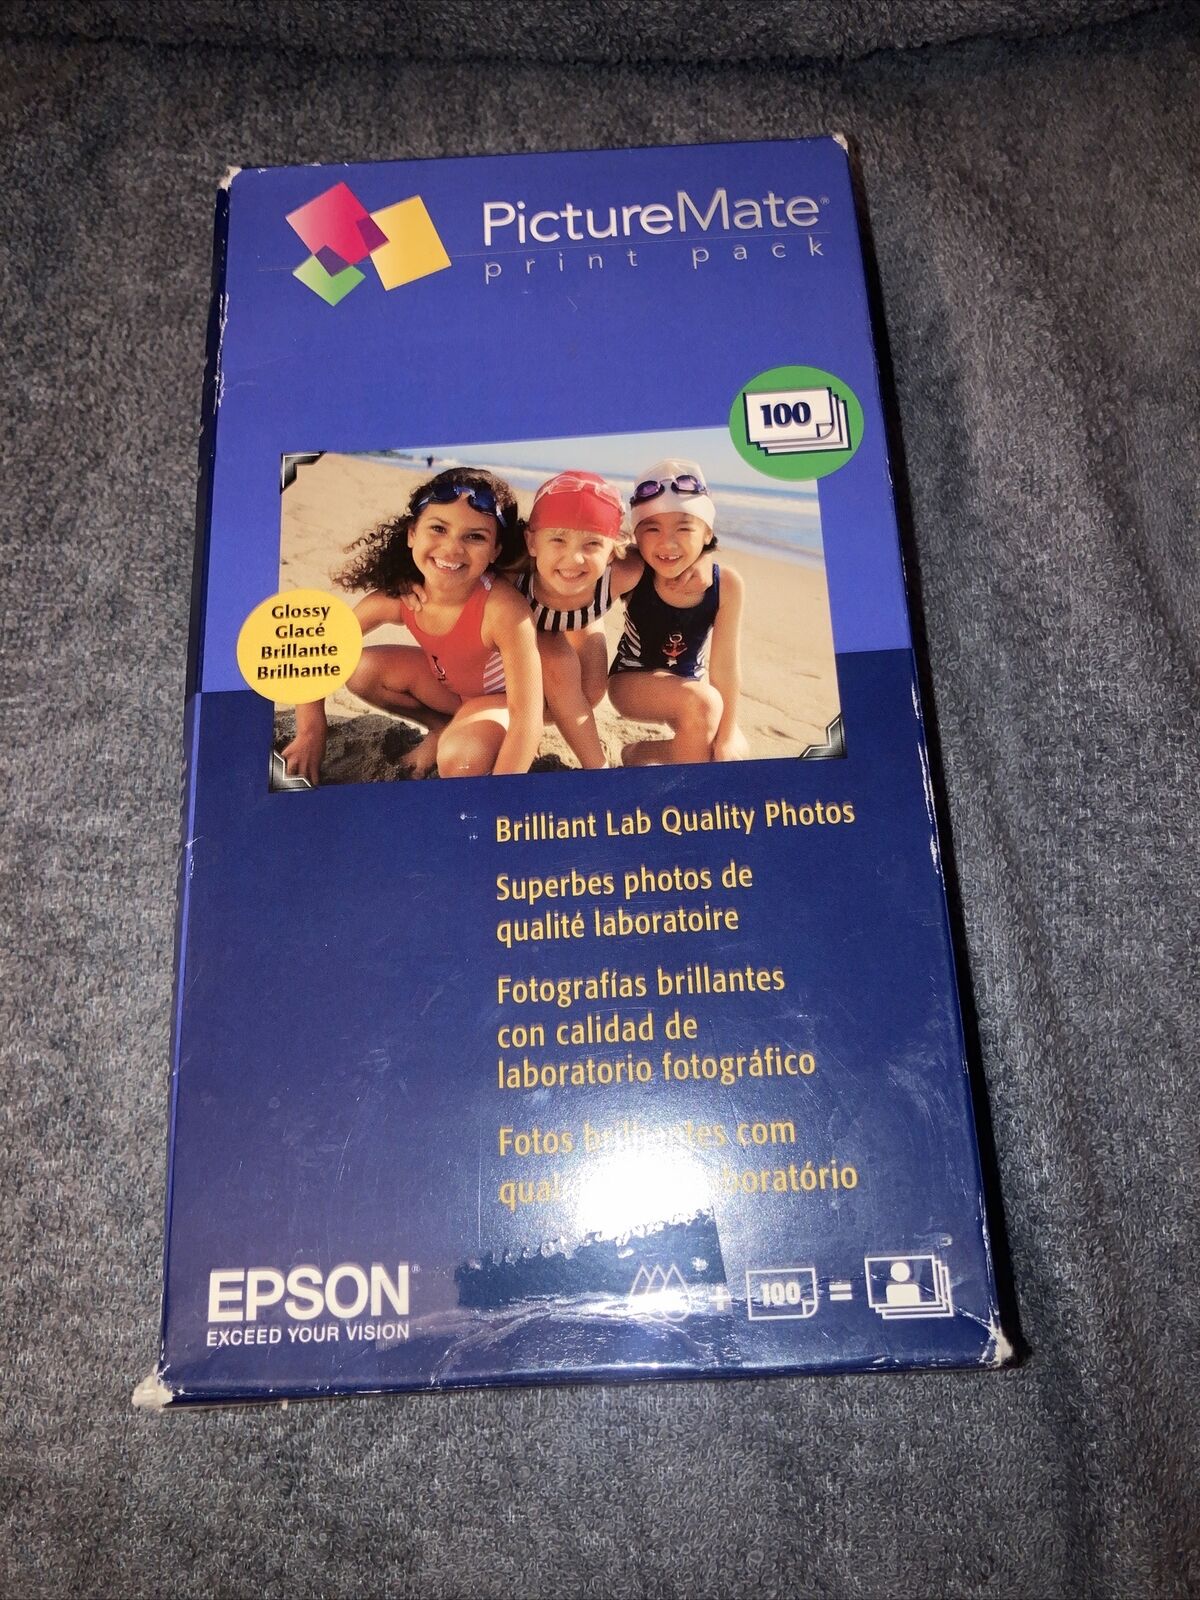 Epson T5570 Picture Mate Print Pack Cartridge + 100 Glossy Sheets Dated 09/2009